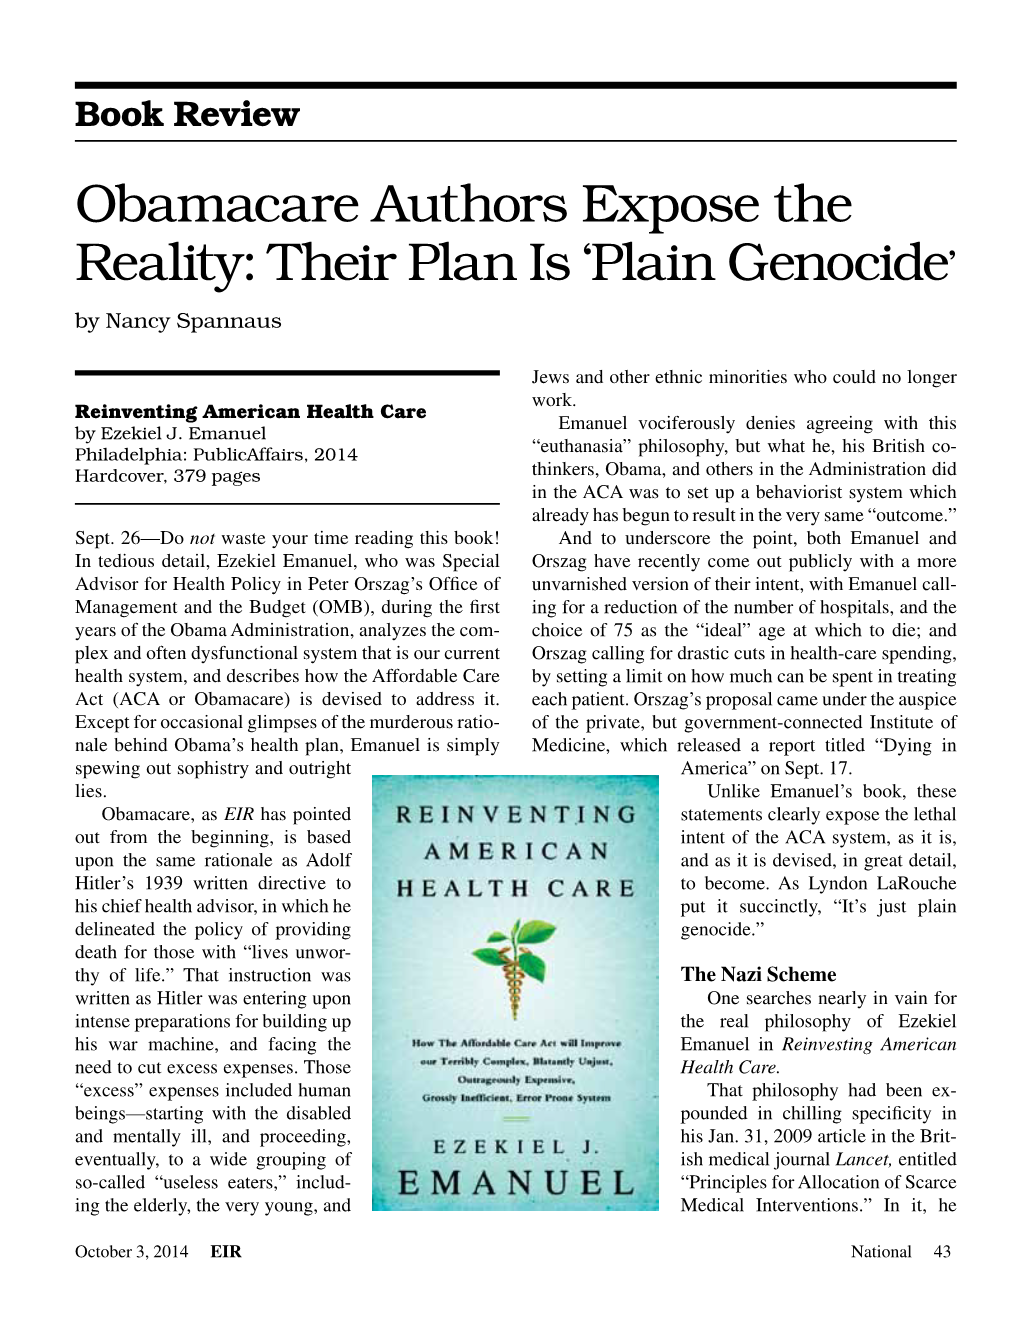 Obamacare Authors Expose the Reality: Their Plan Is 'Plain Genocide'